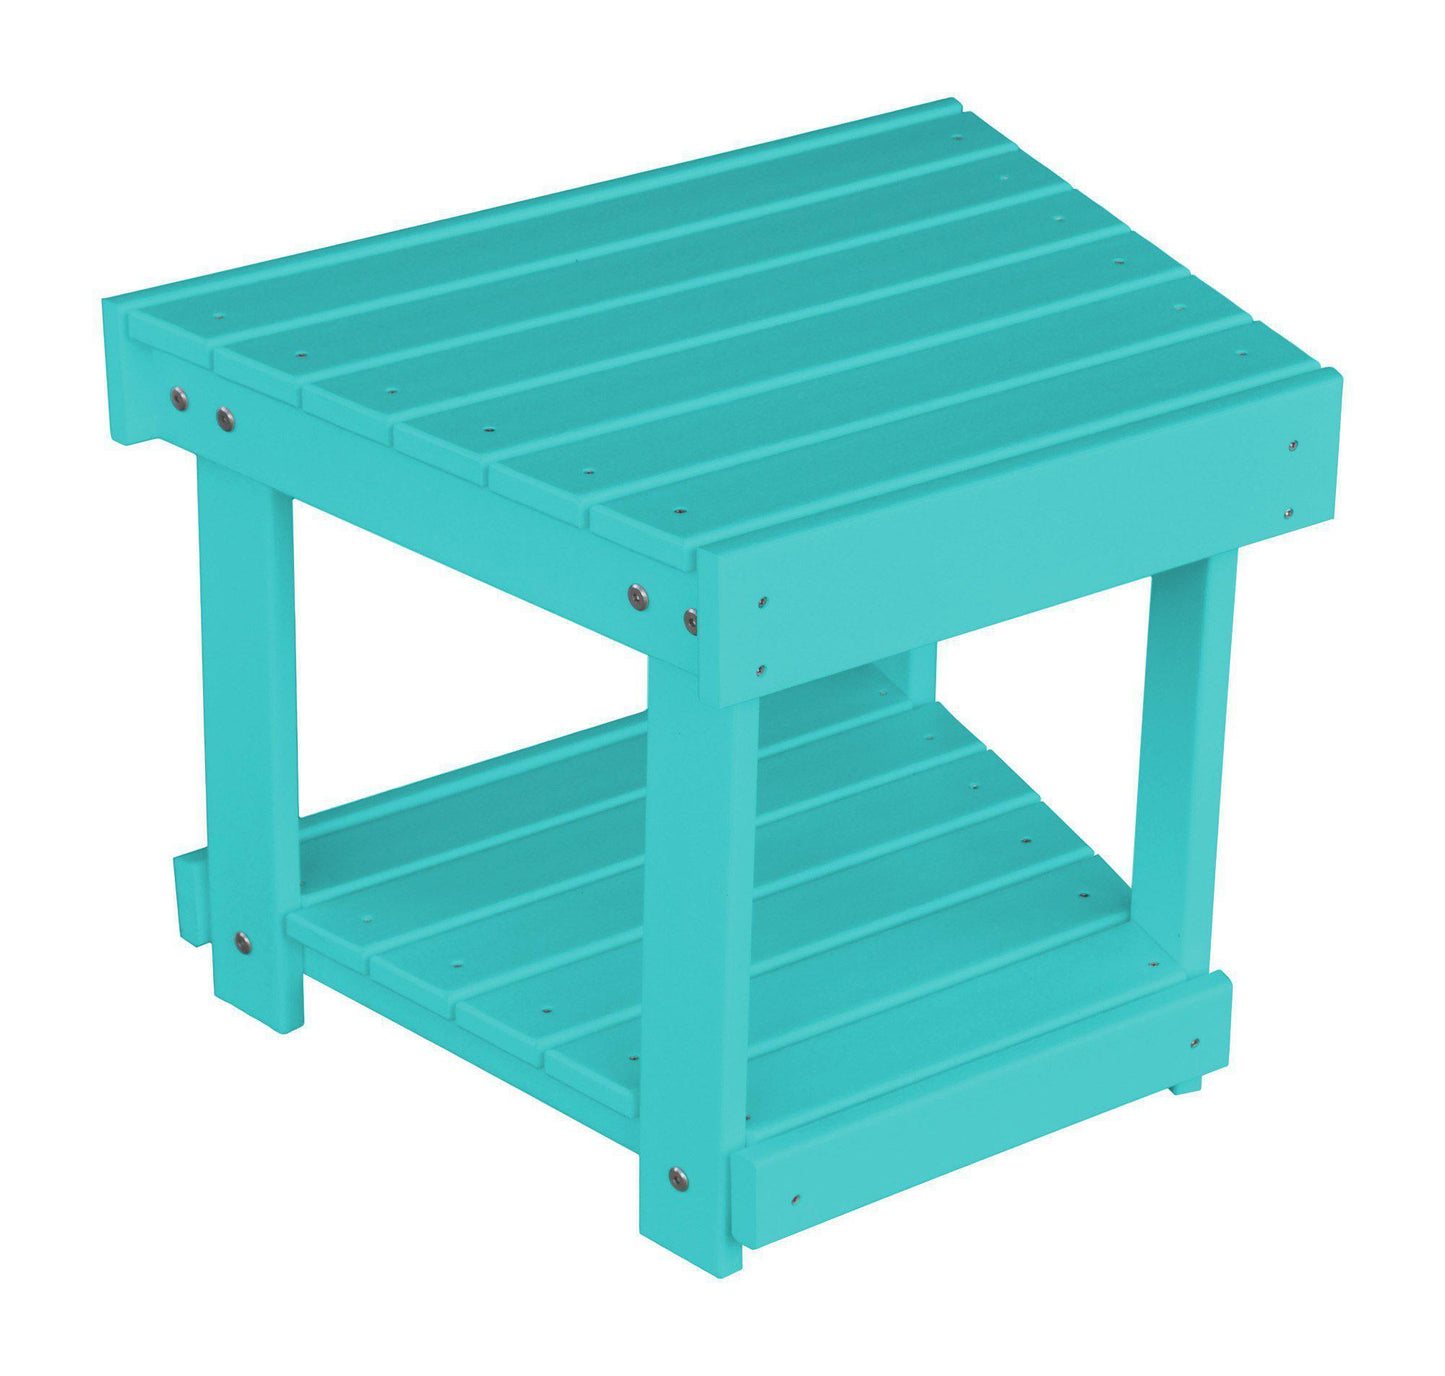 A&L Furniture Company Recycled Plastic Poly New Hope Bench/Side Table - LEAD TIME TO SHIP 2 WEEKS